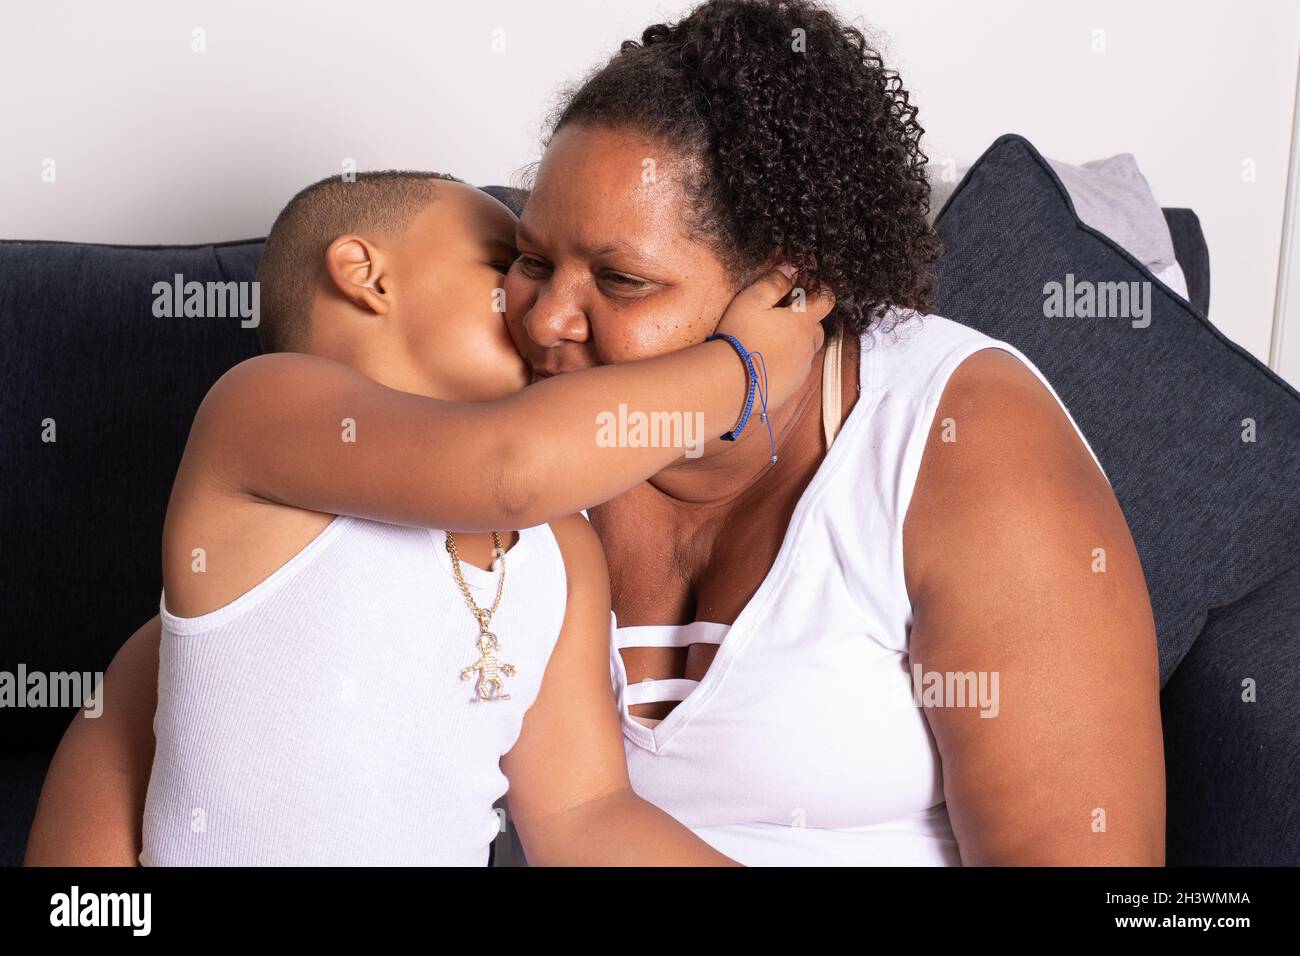 5 year old boy giving his grandmother a kss, sitting on couch Stock Photo